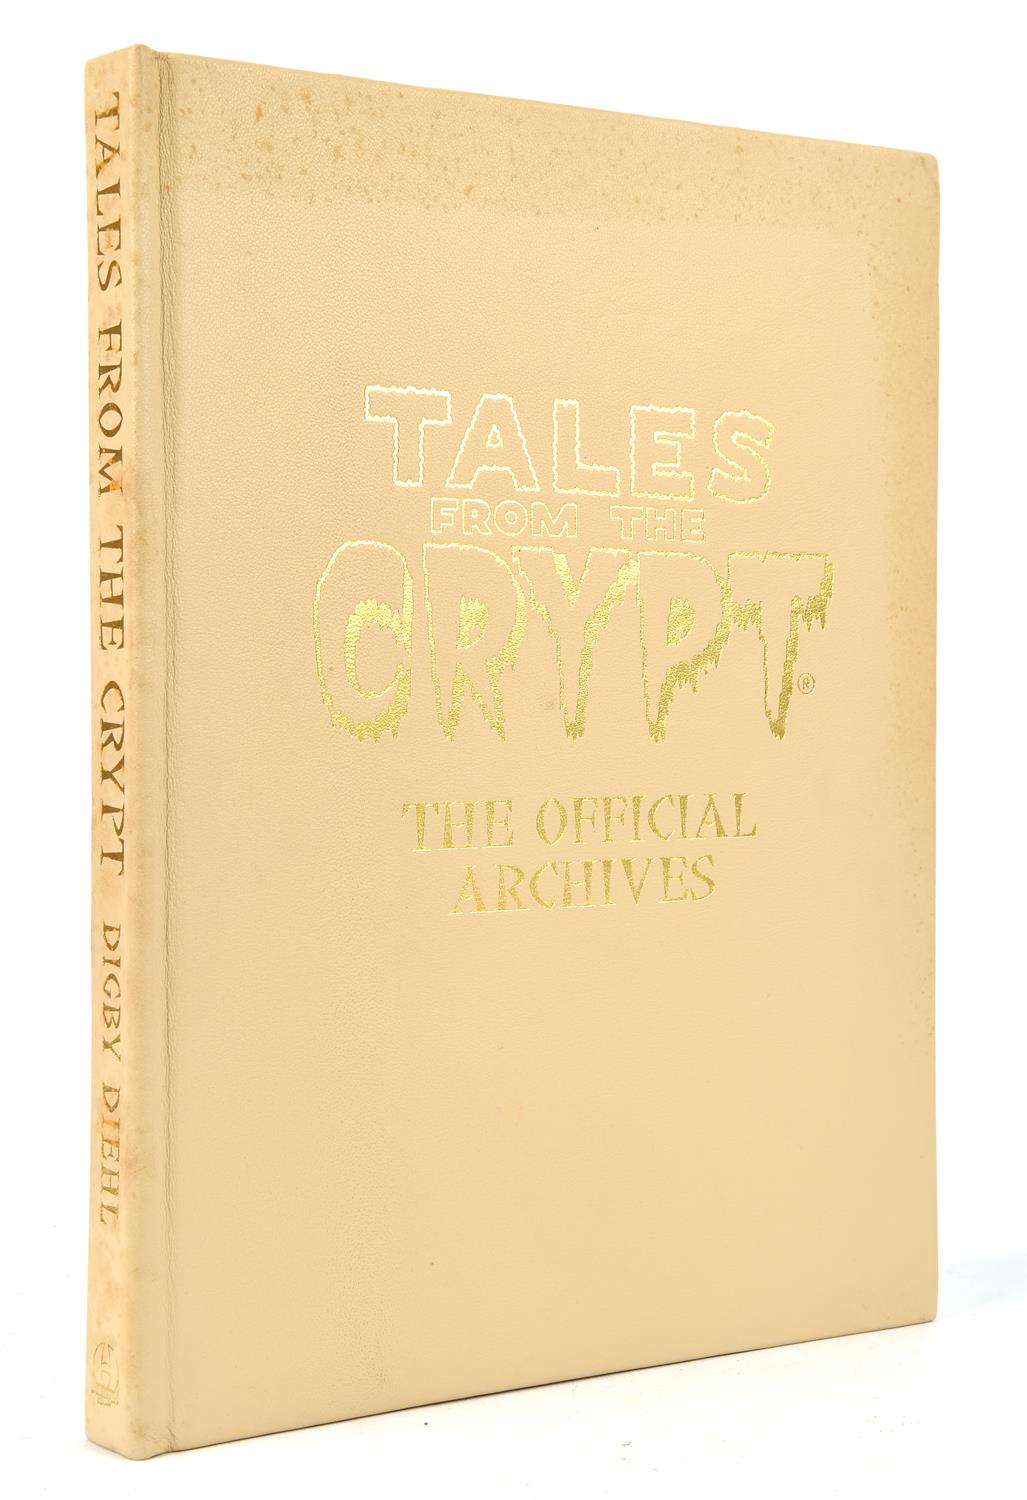 Tales from the Crypt: The Official Archives. Strictly limited Hardcover, limited to 200 copies.